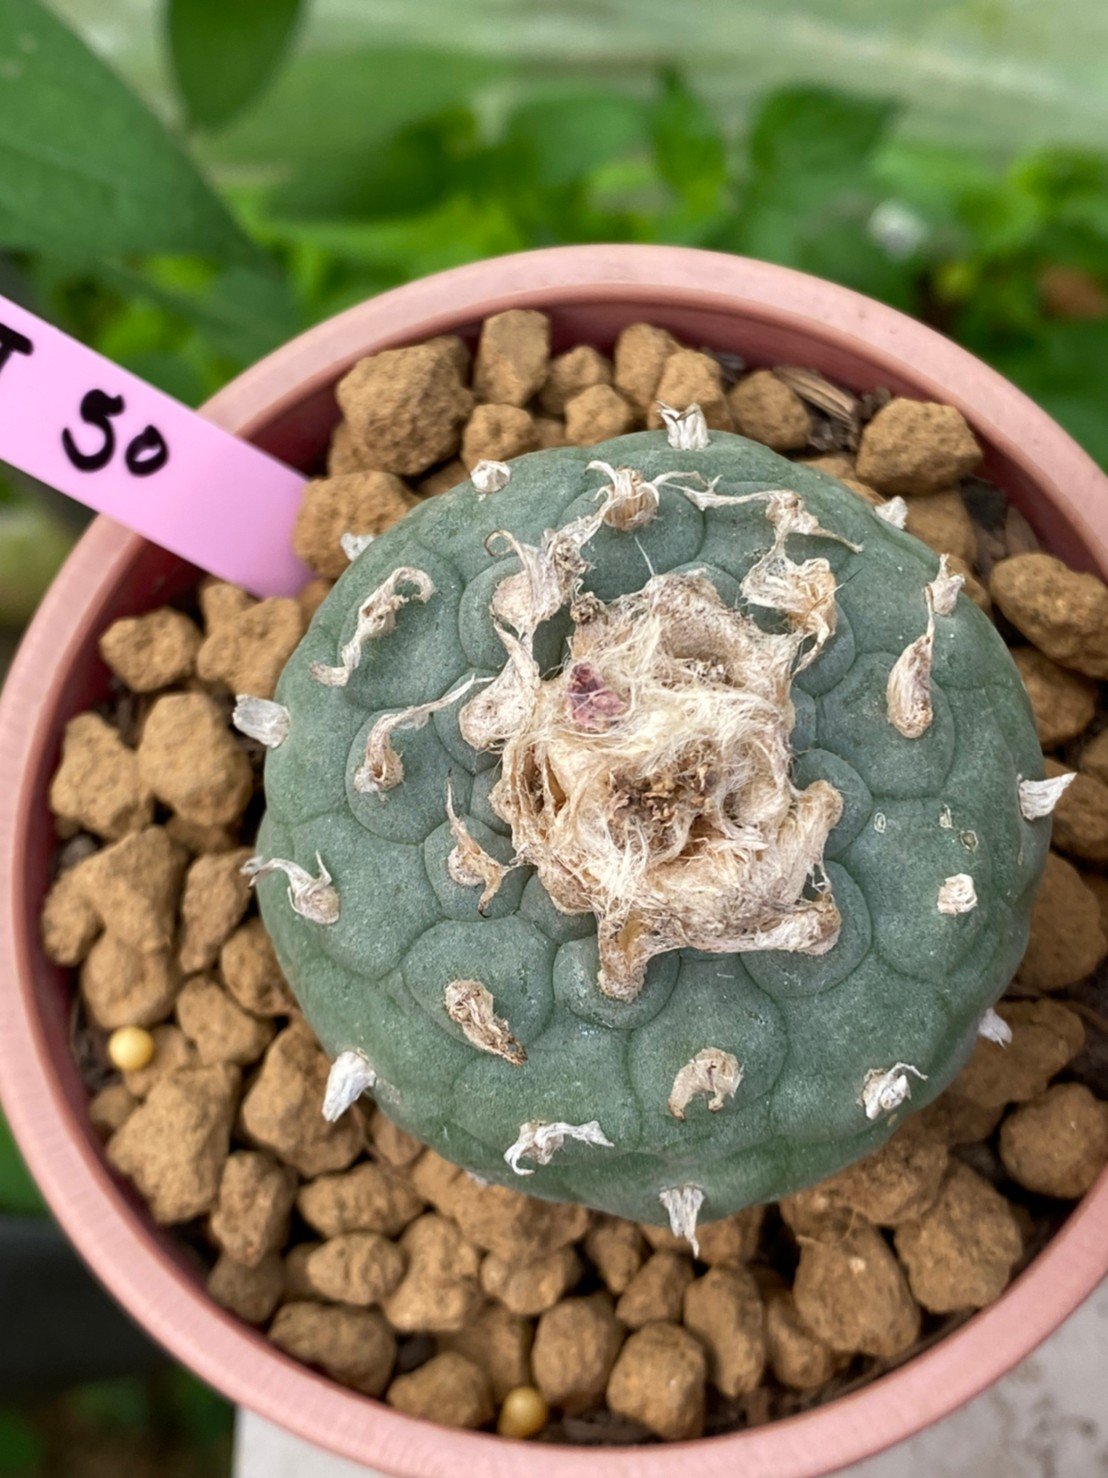 Lophophora williamsii 8-10 cm 16 years old ownroot grow from seed japan